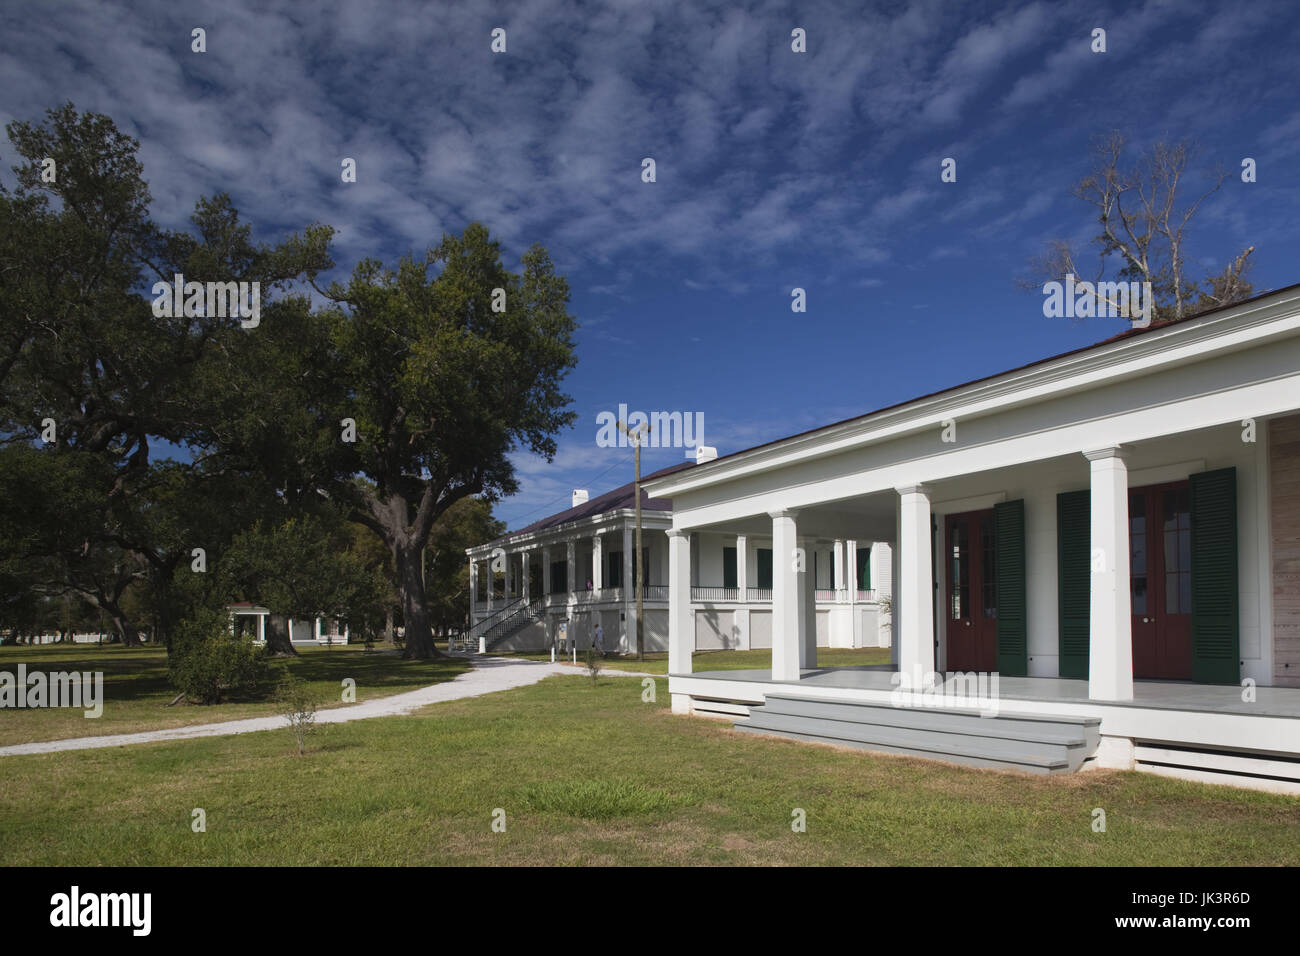 USA, Mississippi, Biloxi, Beauvoir, The Jefferson Davis Home and Presidential Library, former home of US Civil War-era Confederate President, Beauvoir House and Library Pavillion Stock Photo